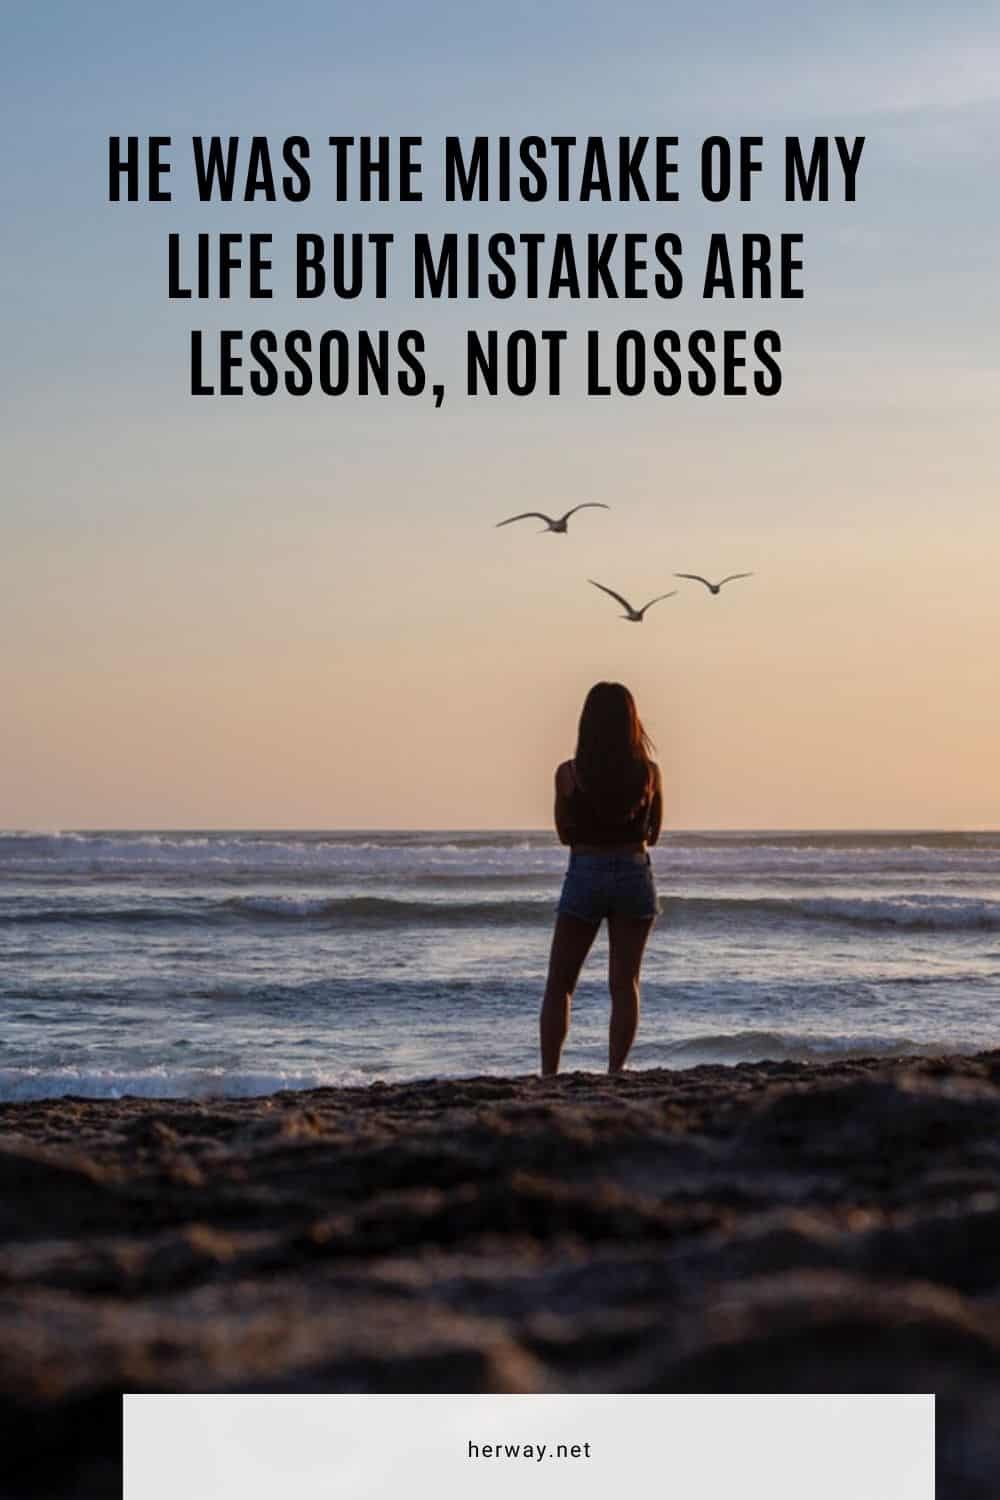 He Was The Mistake Of My Life But Mistakes Are Lessons, Not Losses